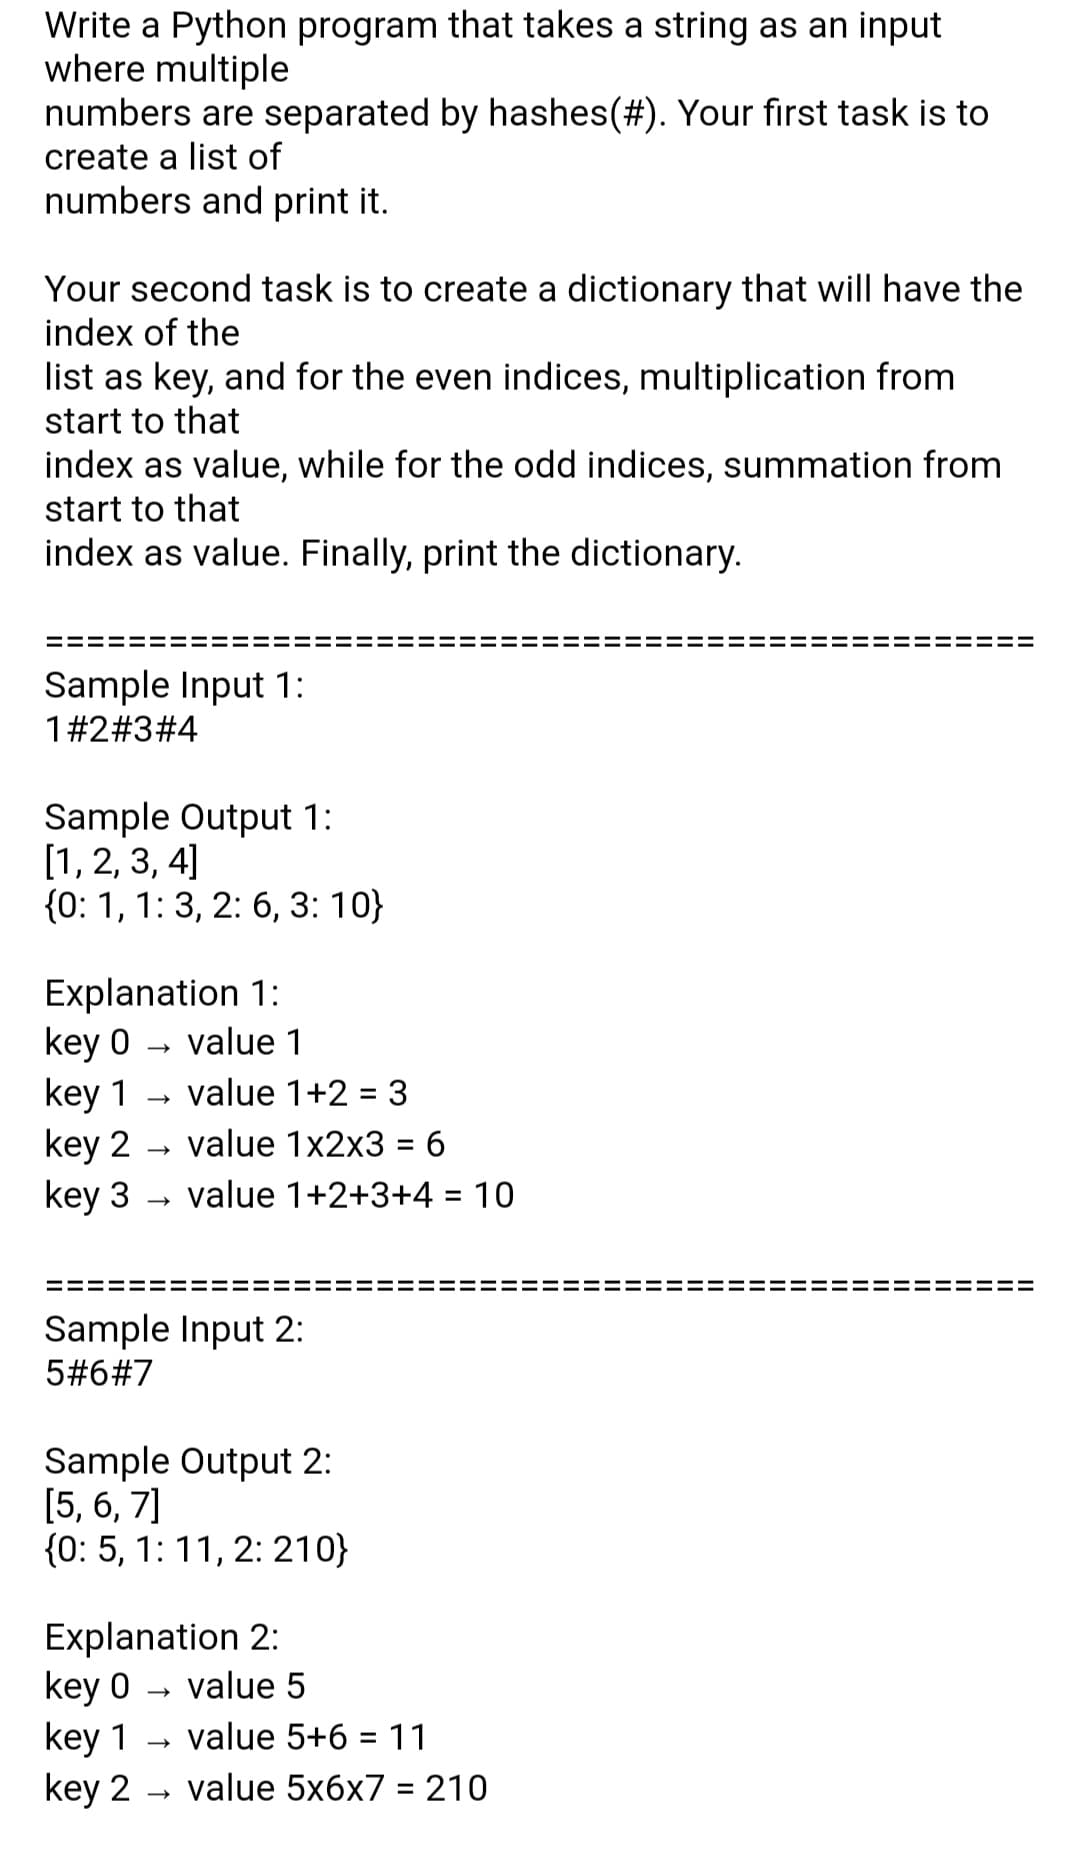 Write a Python program that takes a string as an input
where multiple
numbers are separated by hashes(#). Your first task is to
create a list of
numbers and print it.
Your second task is to create a dictionary that will have the
index of the
list as key, and for the even indices, multiplication from
start to that
index as value, while for the odd indices, summation from
start to that
index as value. Finally, print the dictionary.
Sample Input 1:
1#2#3#4
Sample Output 1:
[1, 2, 3, 4]
{0: 1, 1: 3, 2: 6, 3: 10}
Explanation 1:
key 0
key 1
key 2
key 3
value 1
value 1+2 = 3
value 1x2x3 = 6
value 1+2+3+4 = 10
Sample Input 2:
5#6#7
Sample Output 2:
[5, 6, 7]
{0: 5, 1:11, 2: 210}
Explanation 2:
key 0 - value 5
key 1
key 2 - valuе 5xбх7 %3D 210
value 5+6 = 11
II
II
II
II
II
II
II
II
II
II
II
II
II
II
II
II
II
